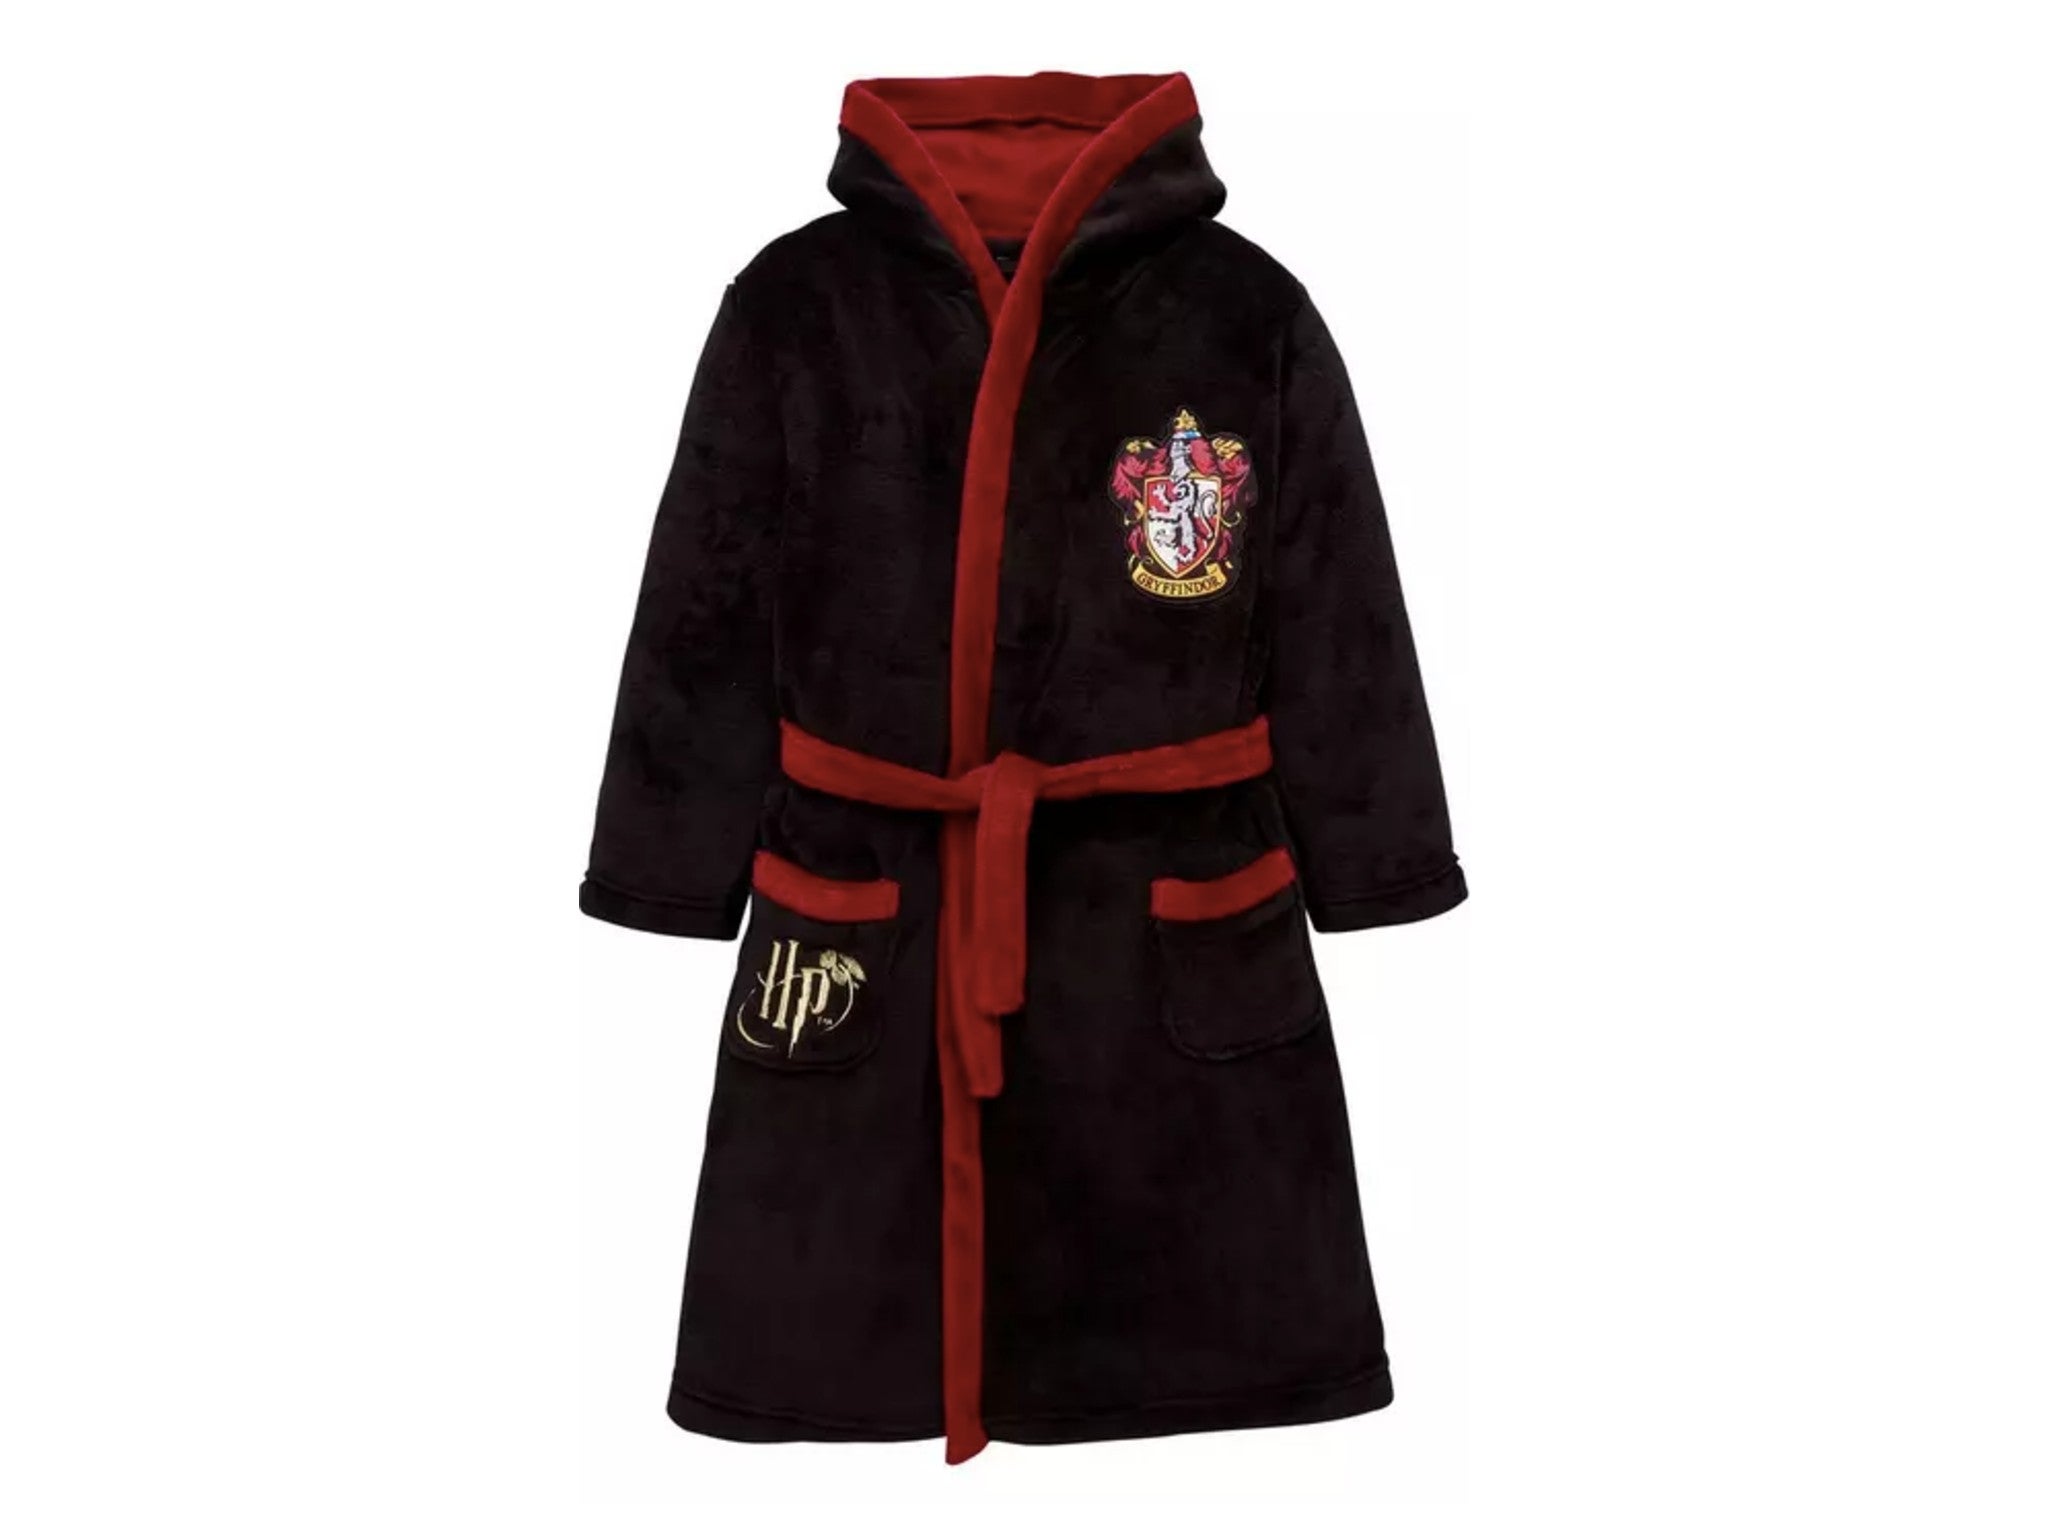 Next Harry Potter dressing gown indybest.jpeg